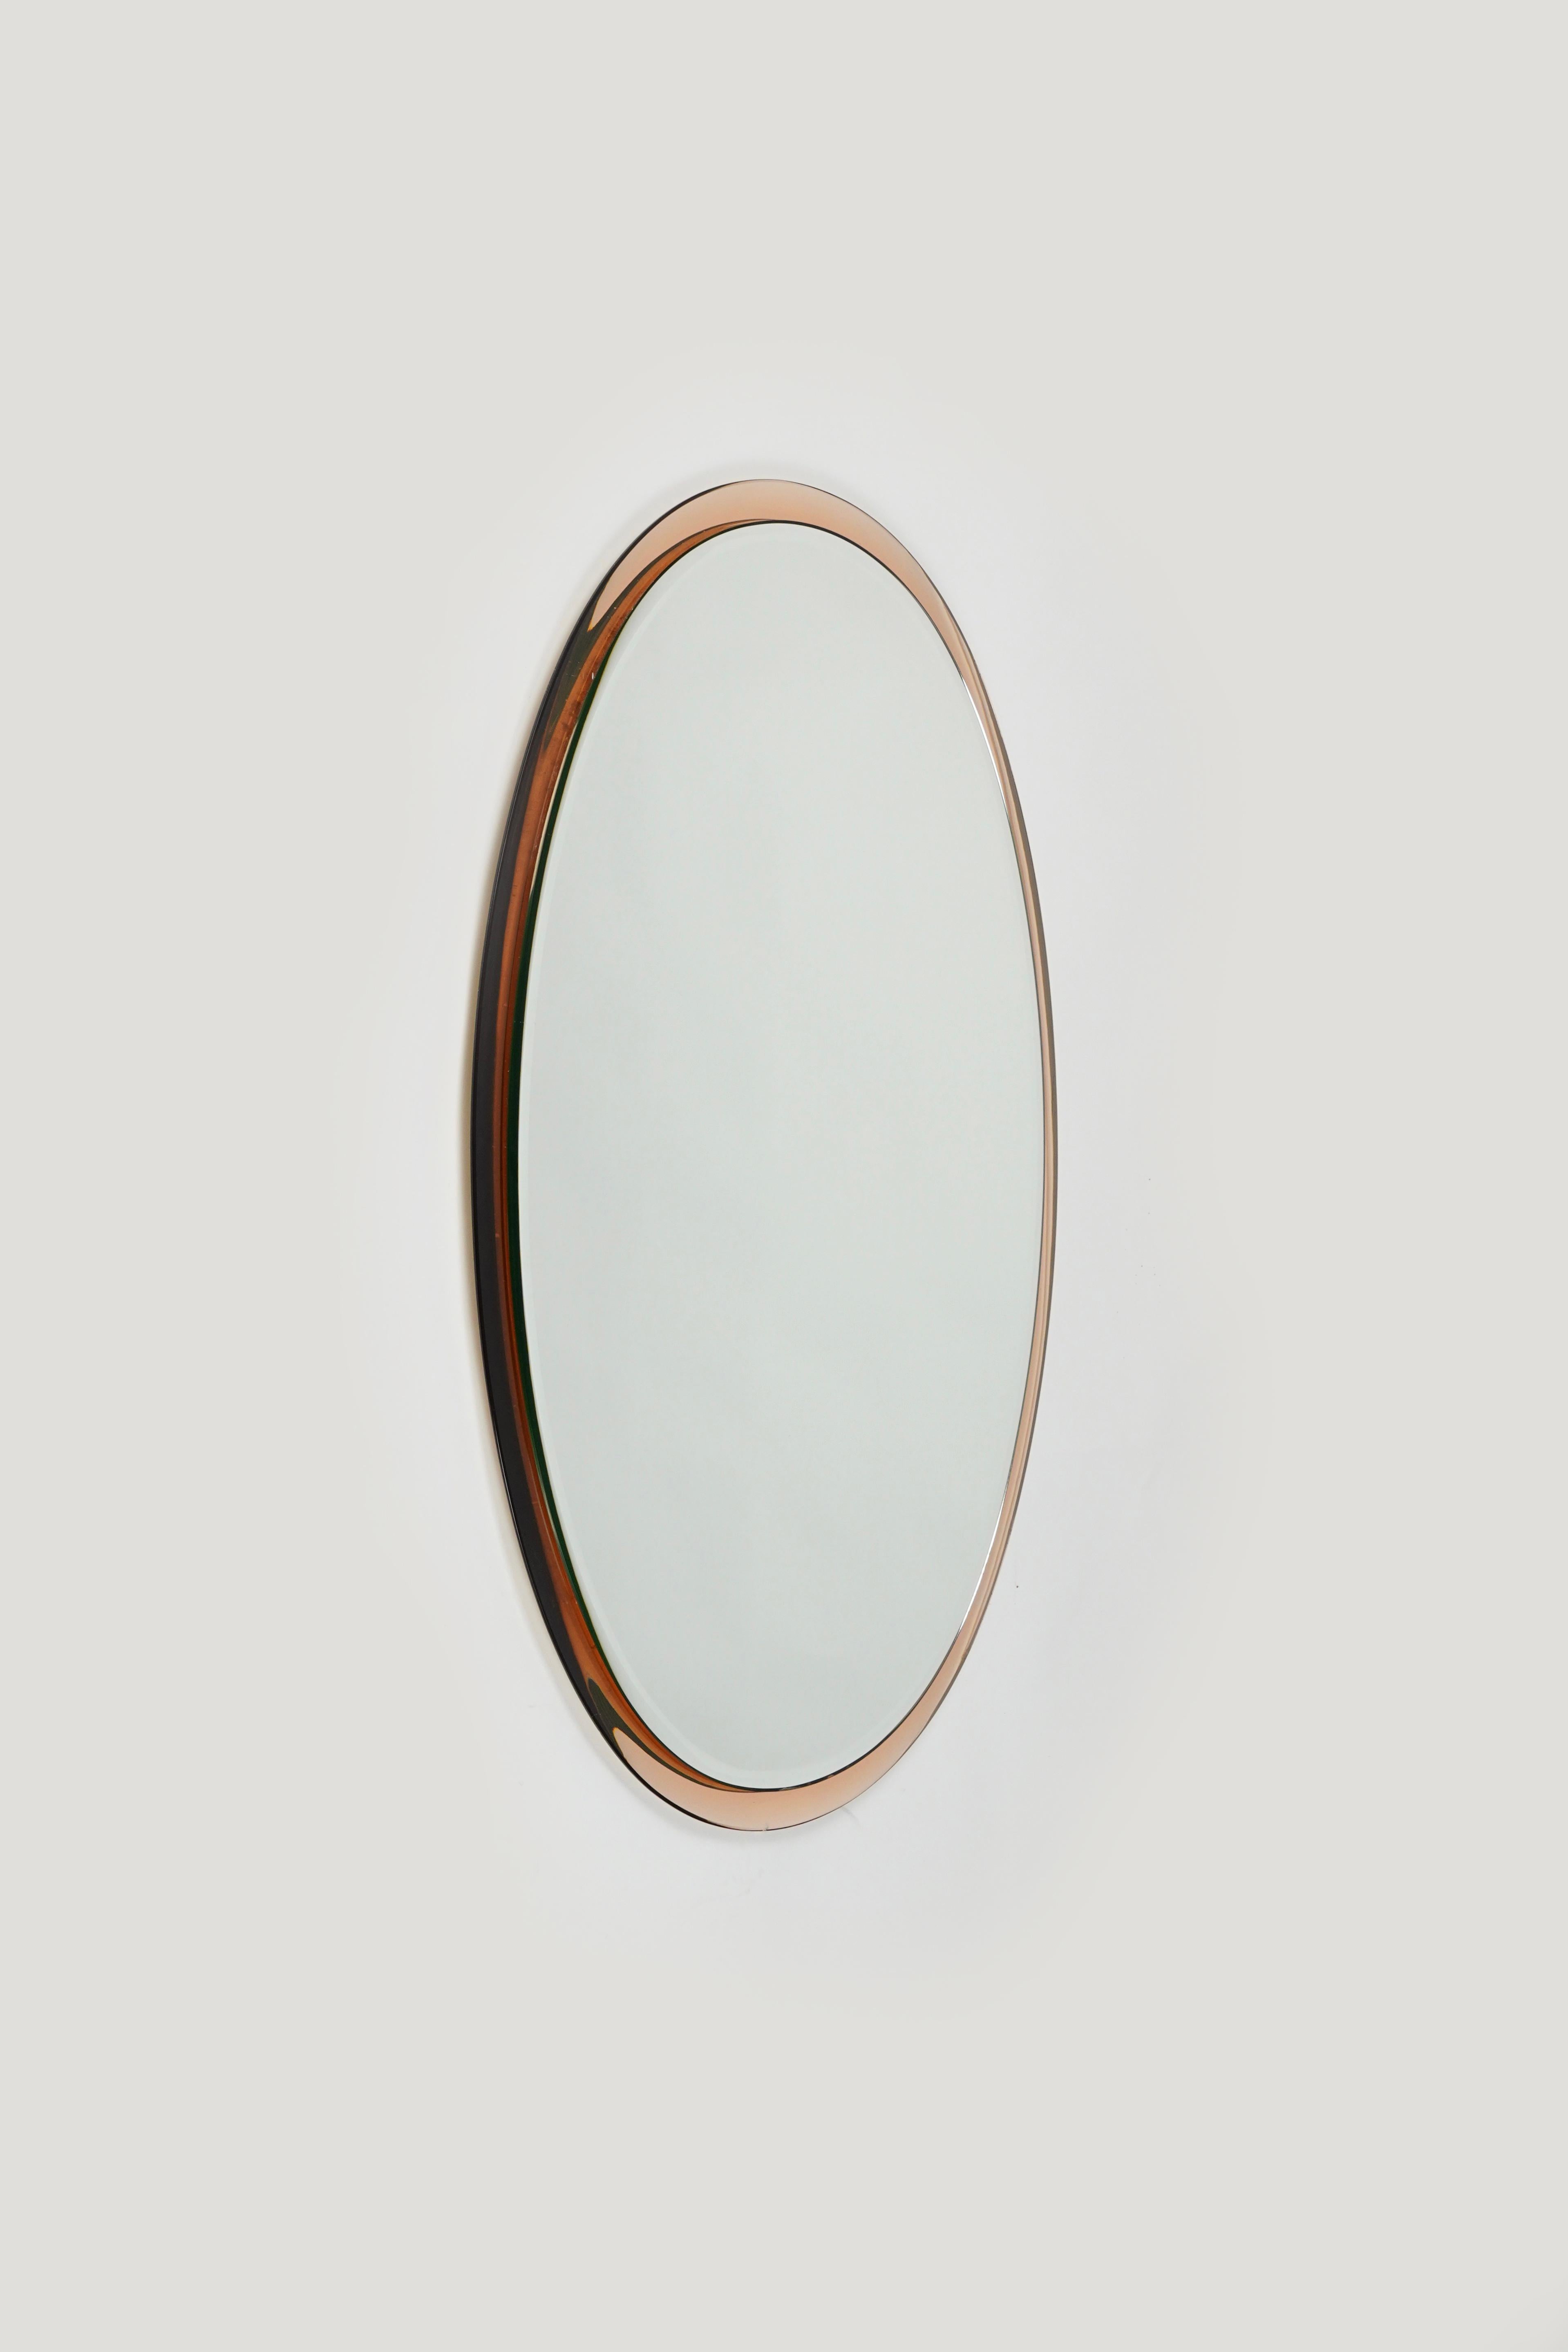 Midcentury oval wall mirror with pink colored mirror frame by Metalvetro Galvorame.

Made in Italy in the 1970s.

The mirror is very well-made, heavy and in good vintage condition.

The mirror would be perfect for a bedroom, dressing room, cloakroom